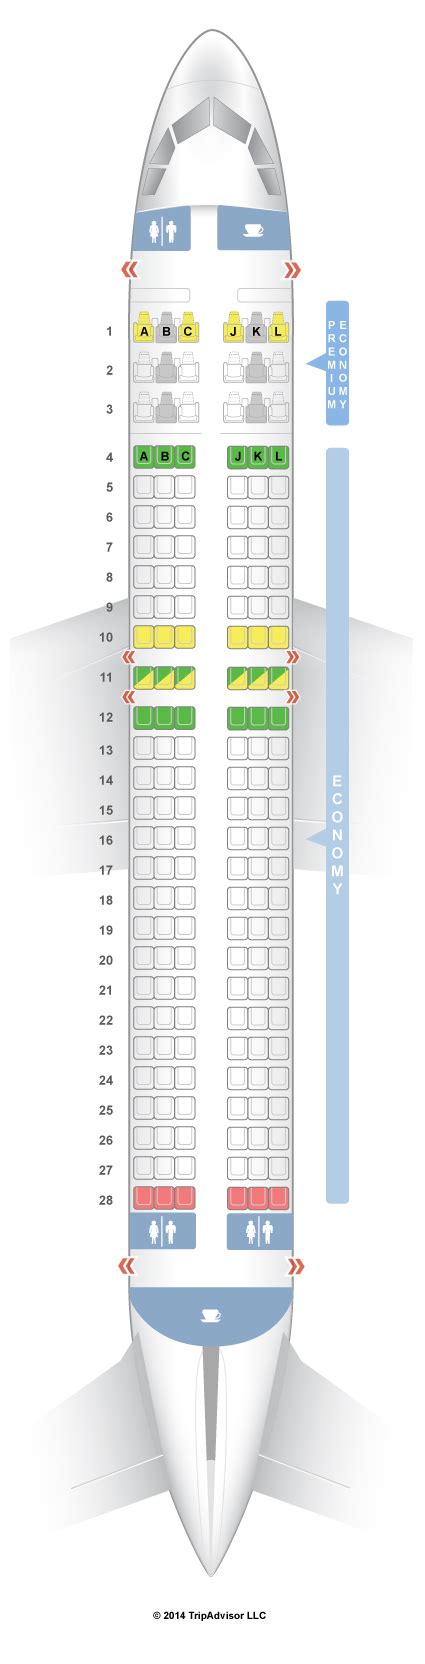 Frontier Airbus A320 Seating Chart Image To U